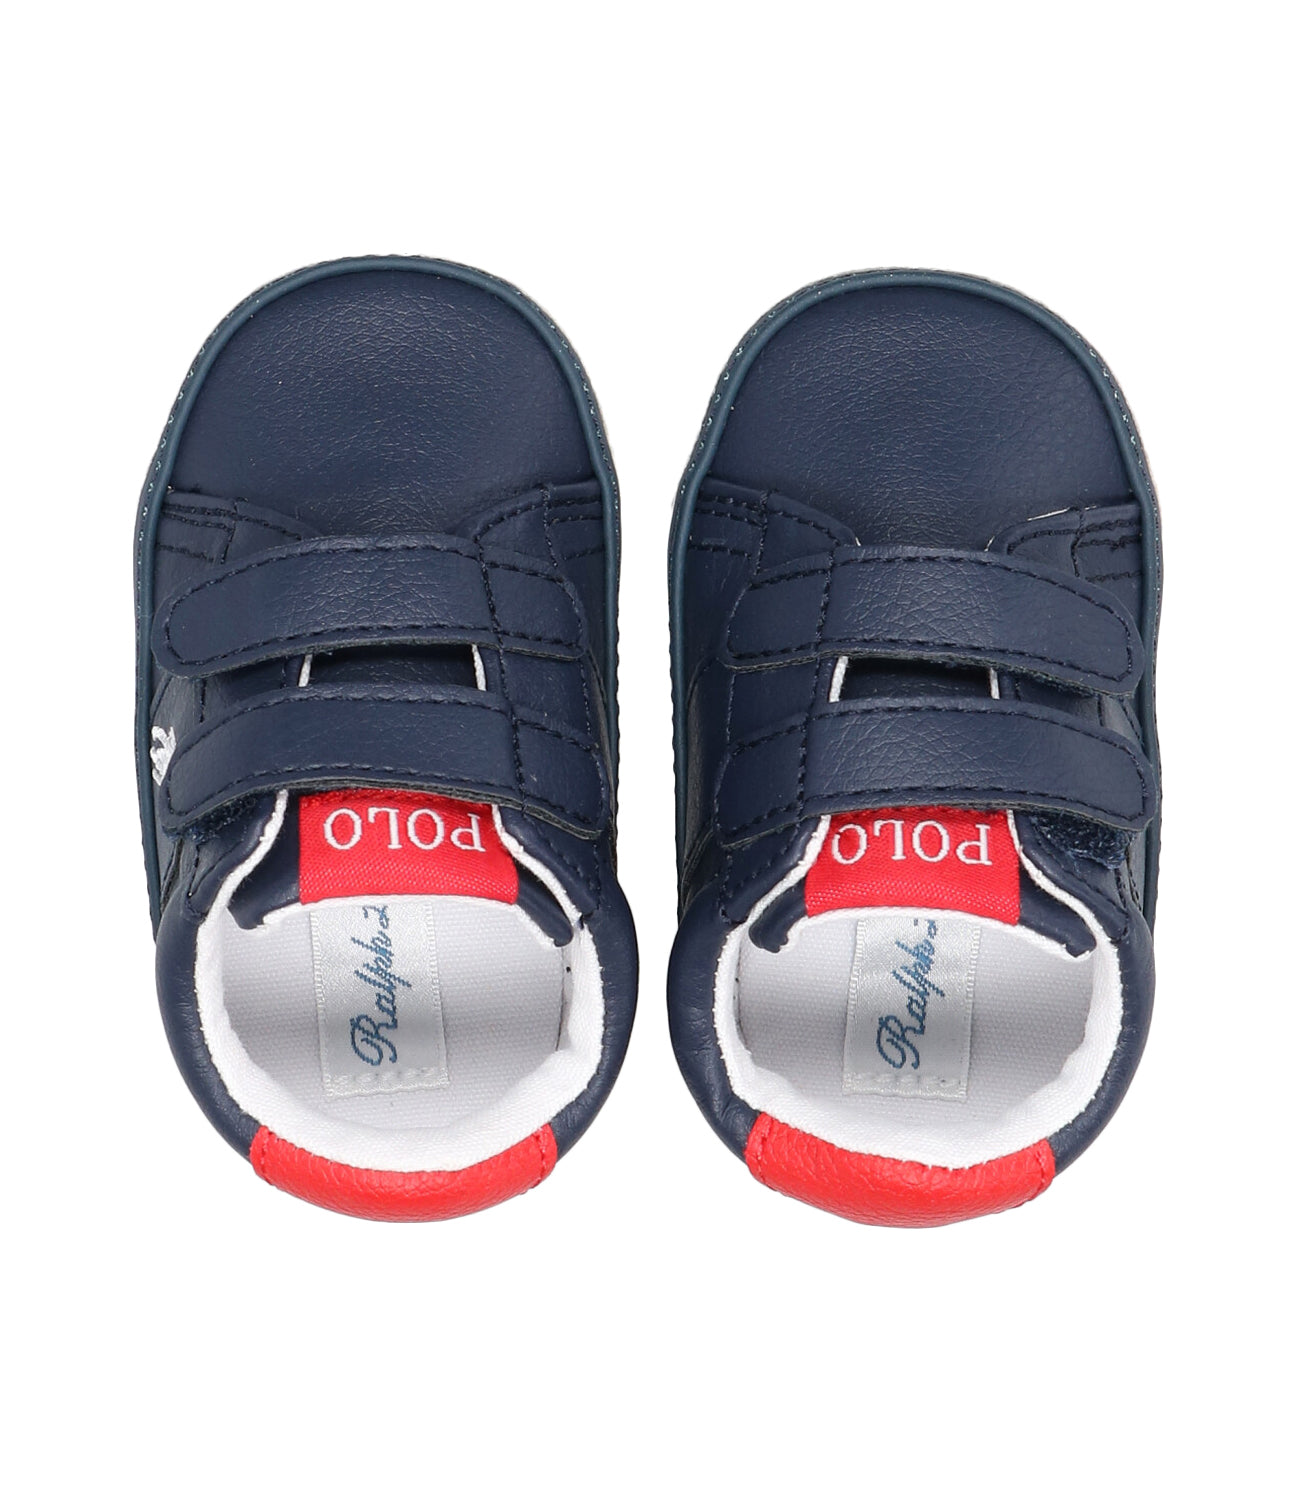 Ralph Lauren Childrenswear | Navy Blue and Red Sneakers